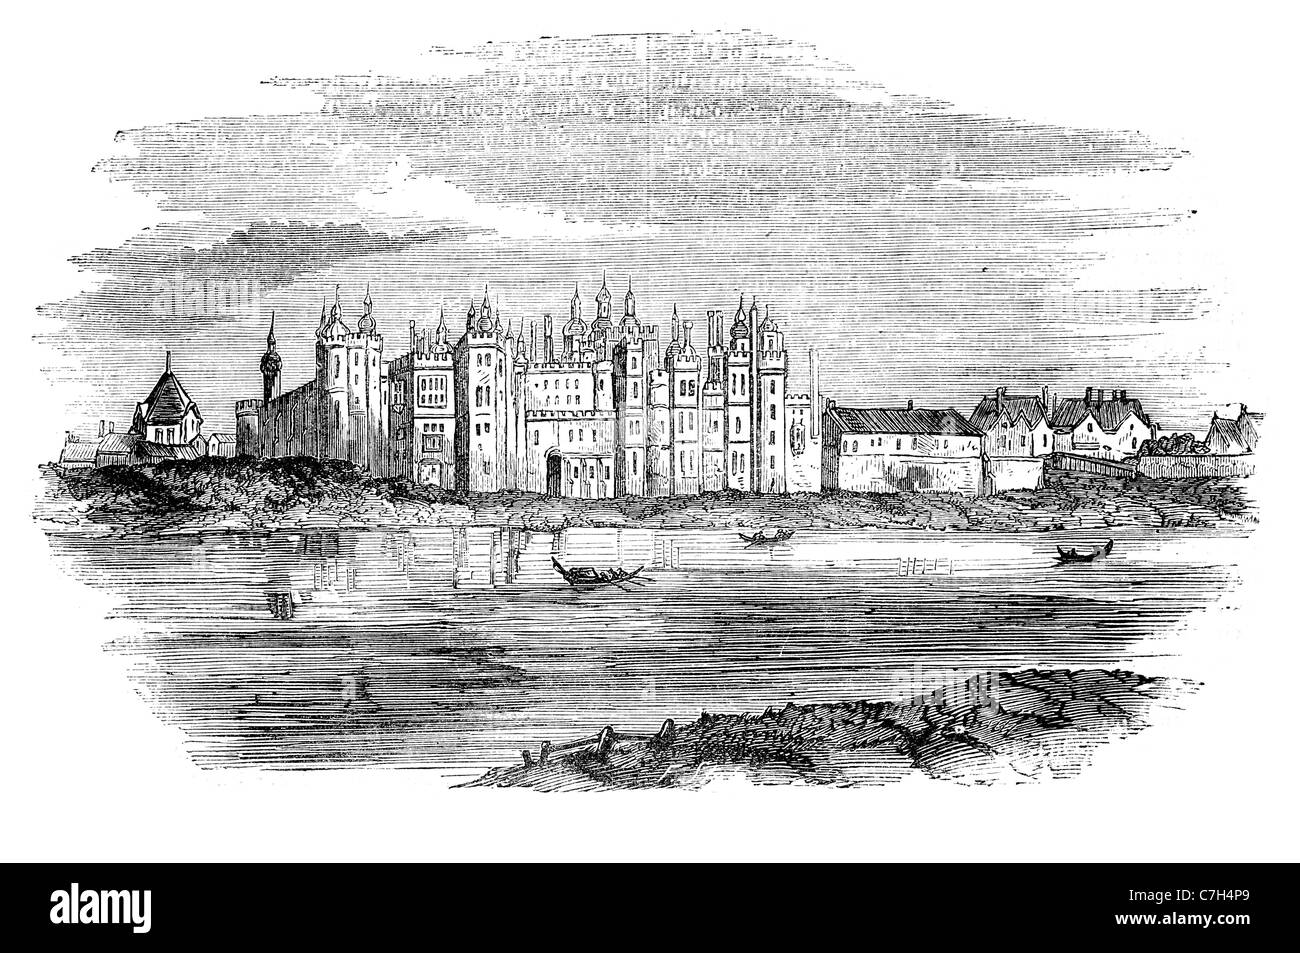 Richmond Palace Thameside residence royal manor Sheen Henry VII England royalty Crown gatehouse  River Thames regal kingly queen Stock Photo